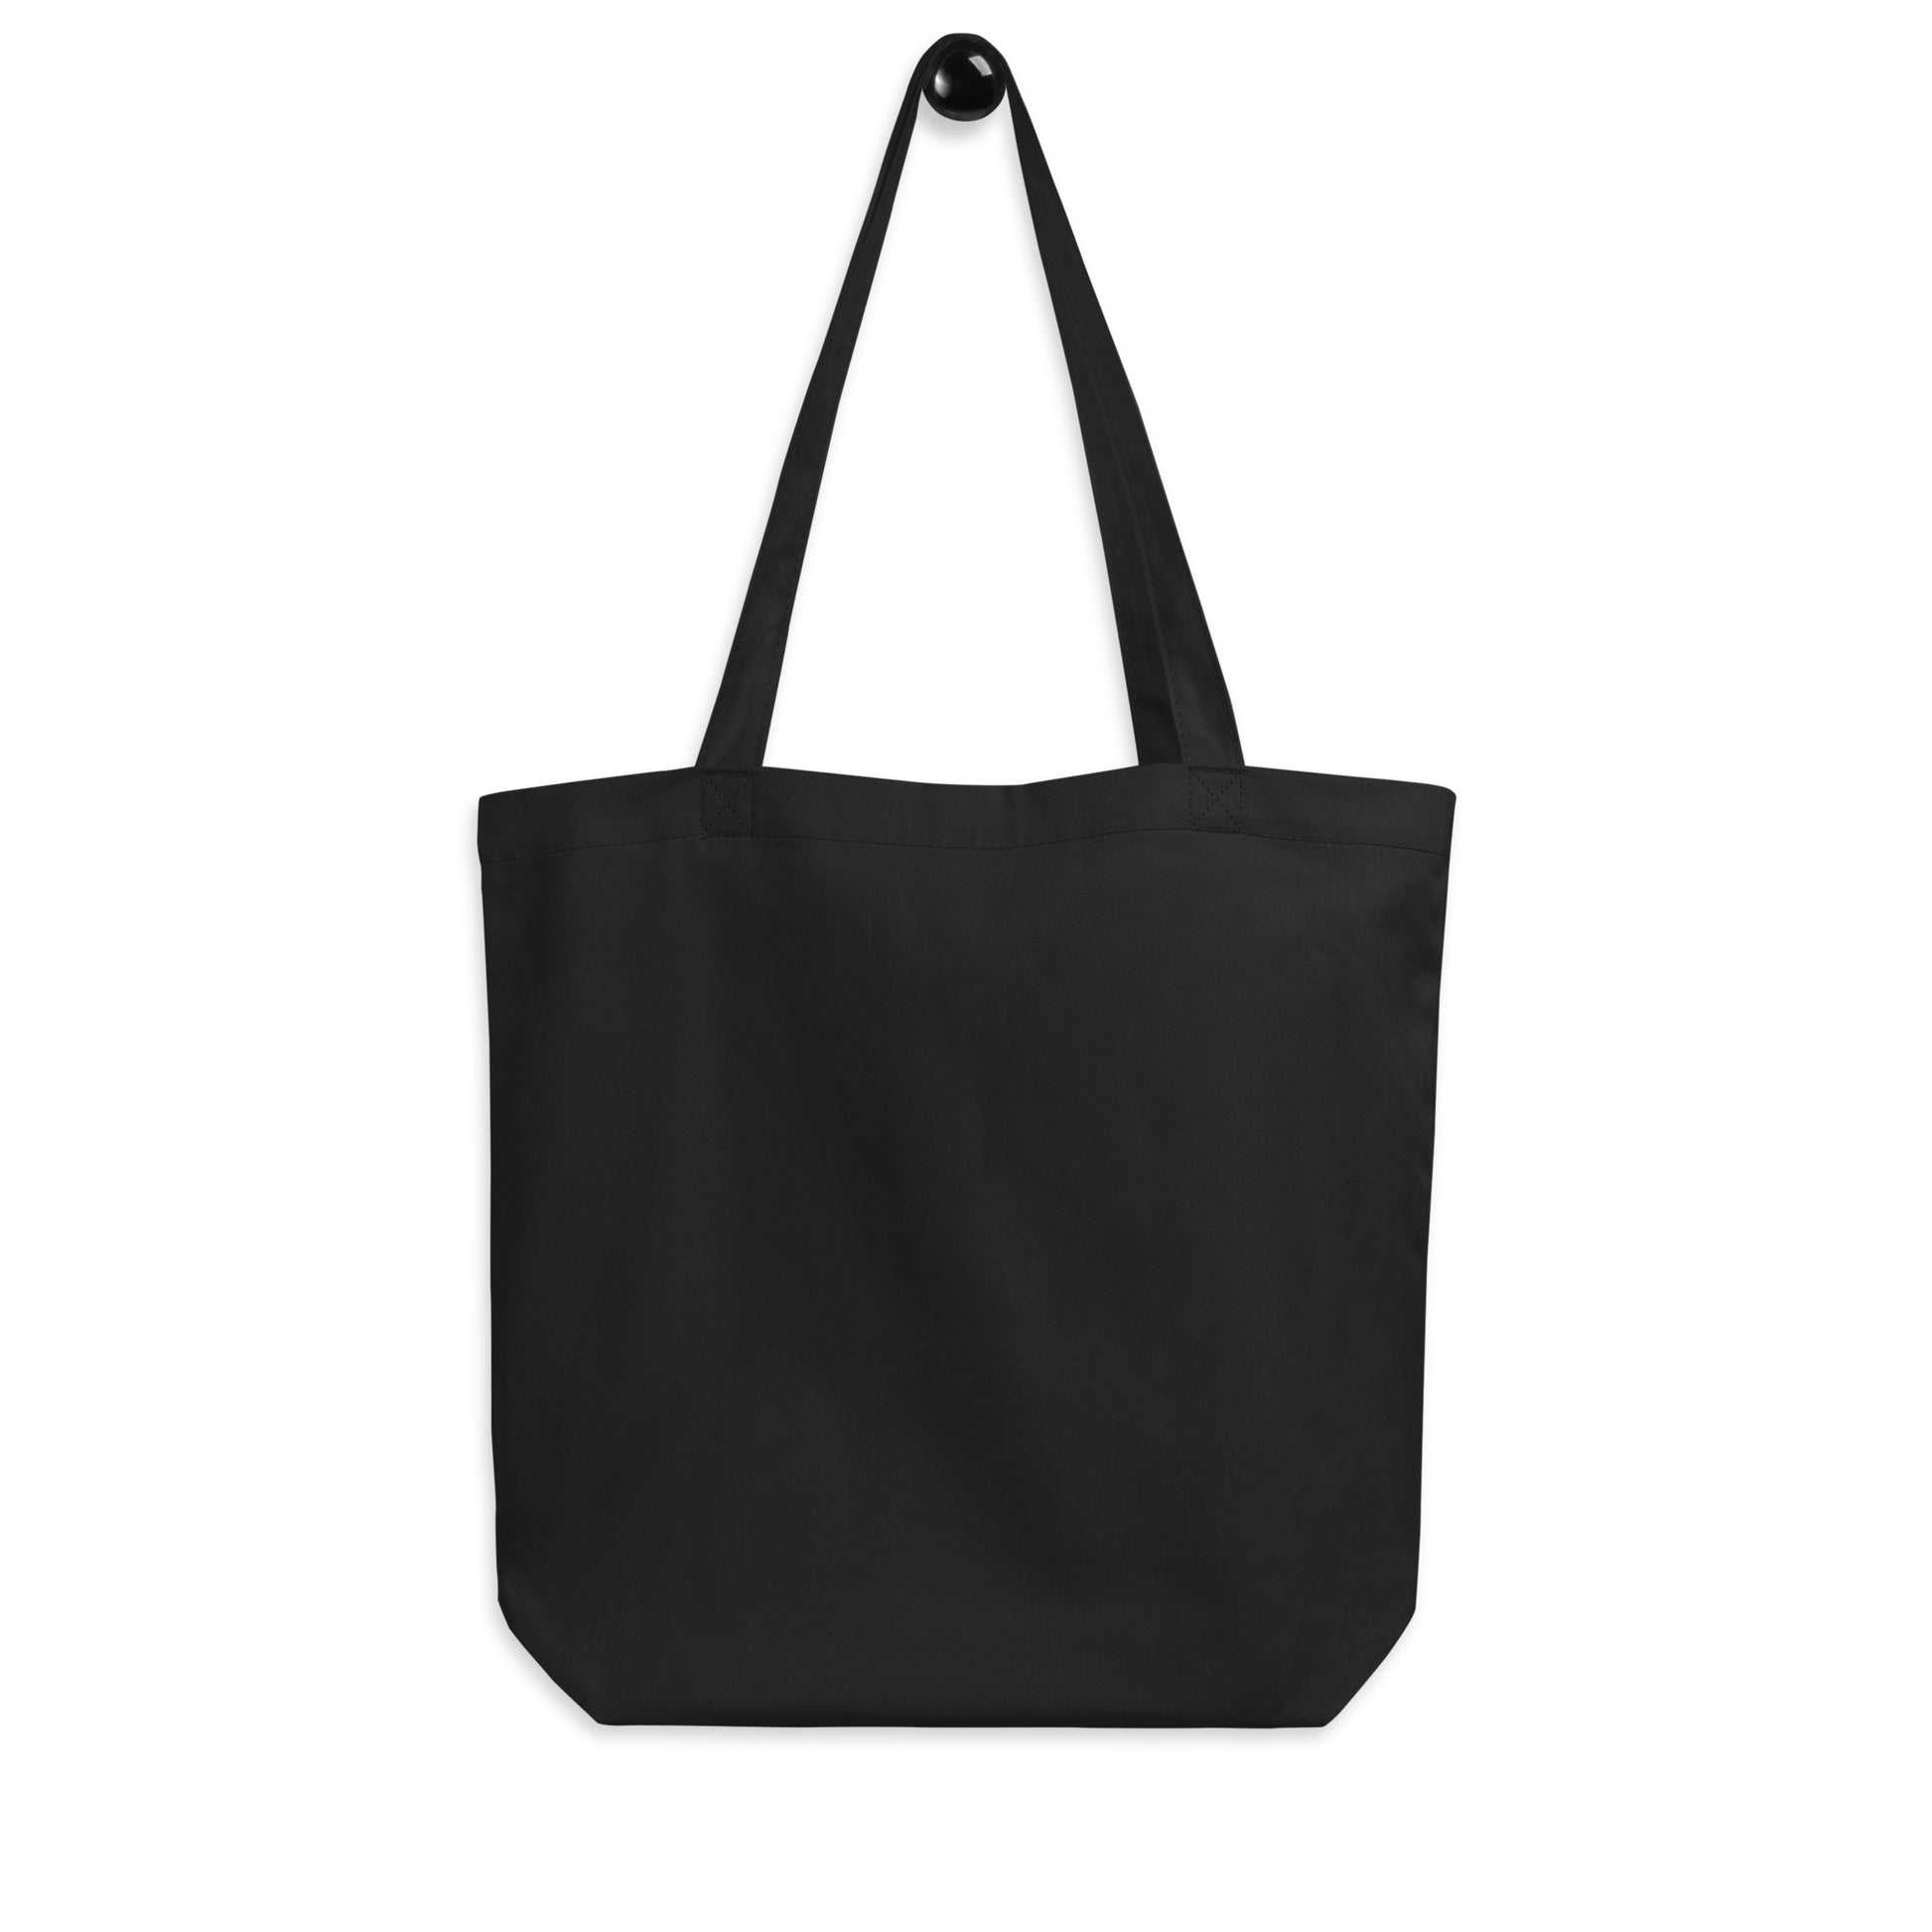 Unique Travel Gift Organic Tote - White Oval • BER Berlin • YHM Designs - Image 05